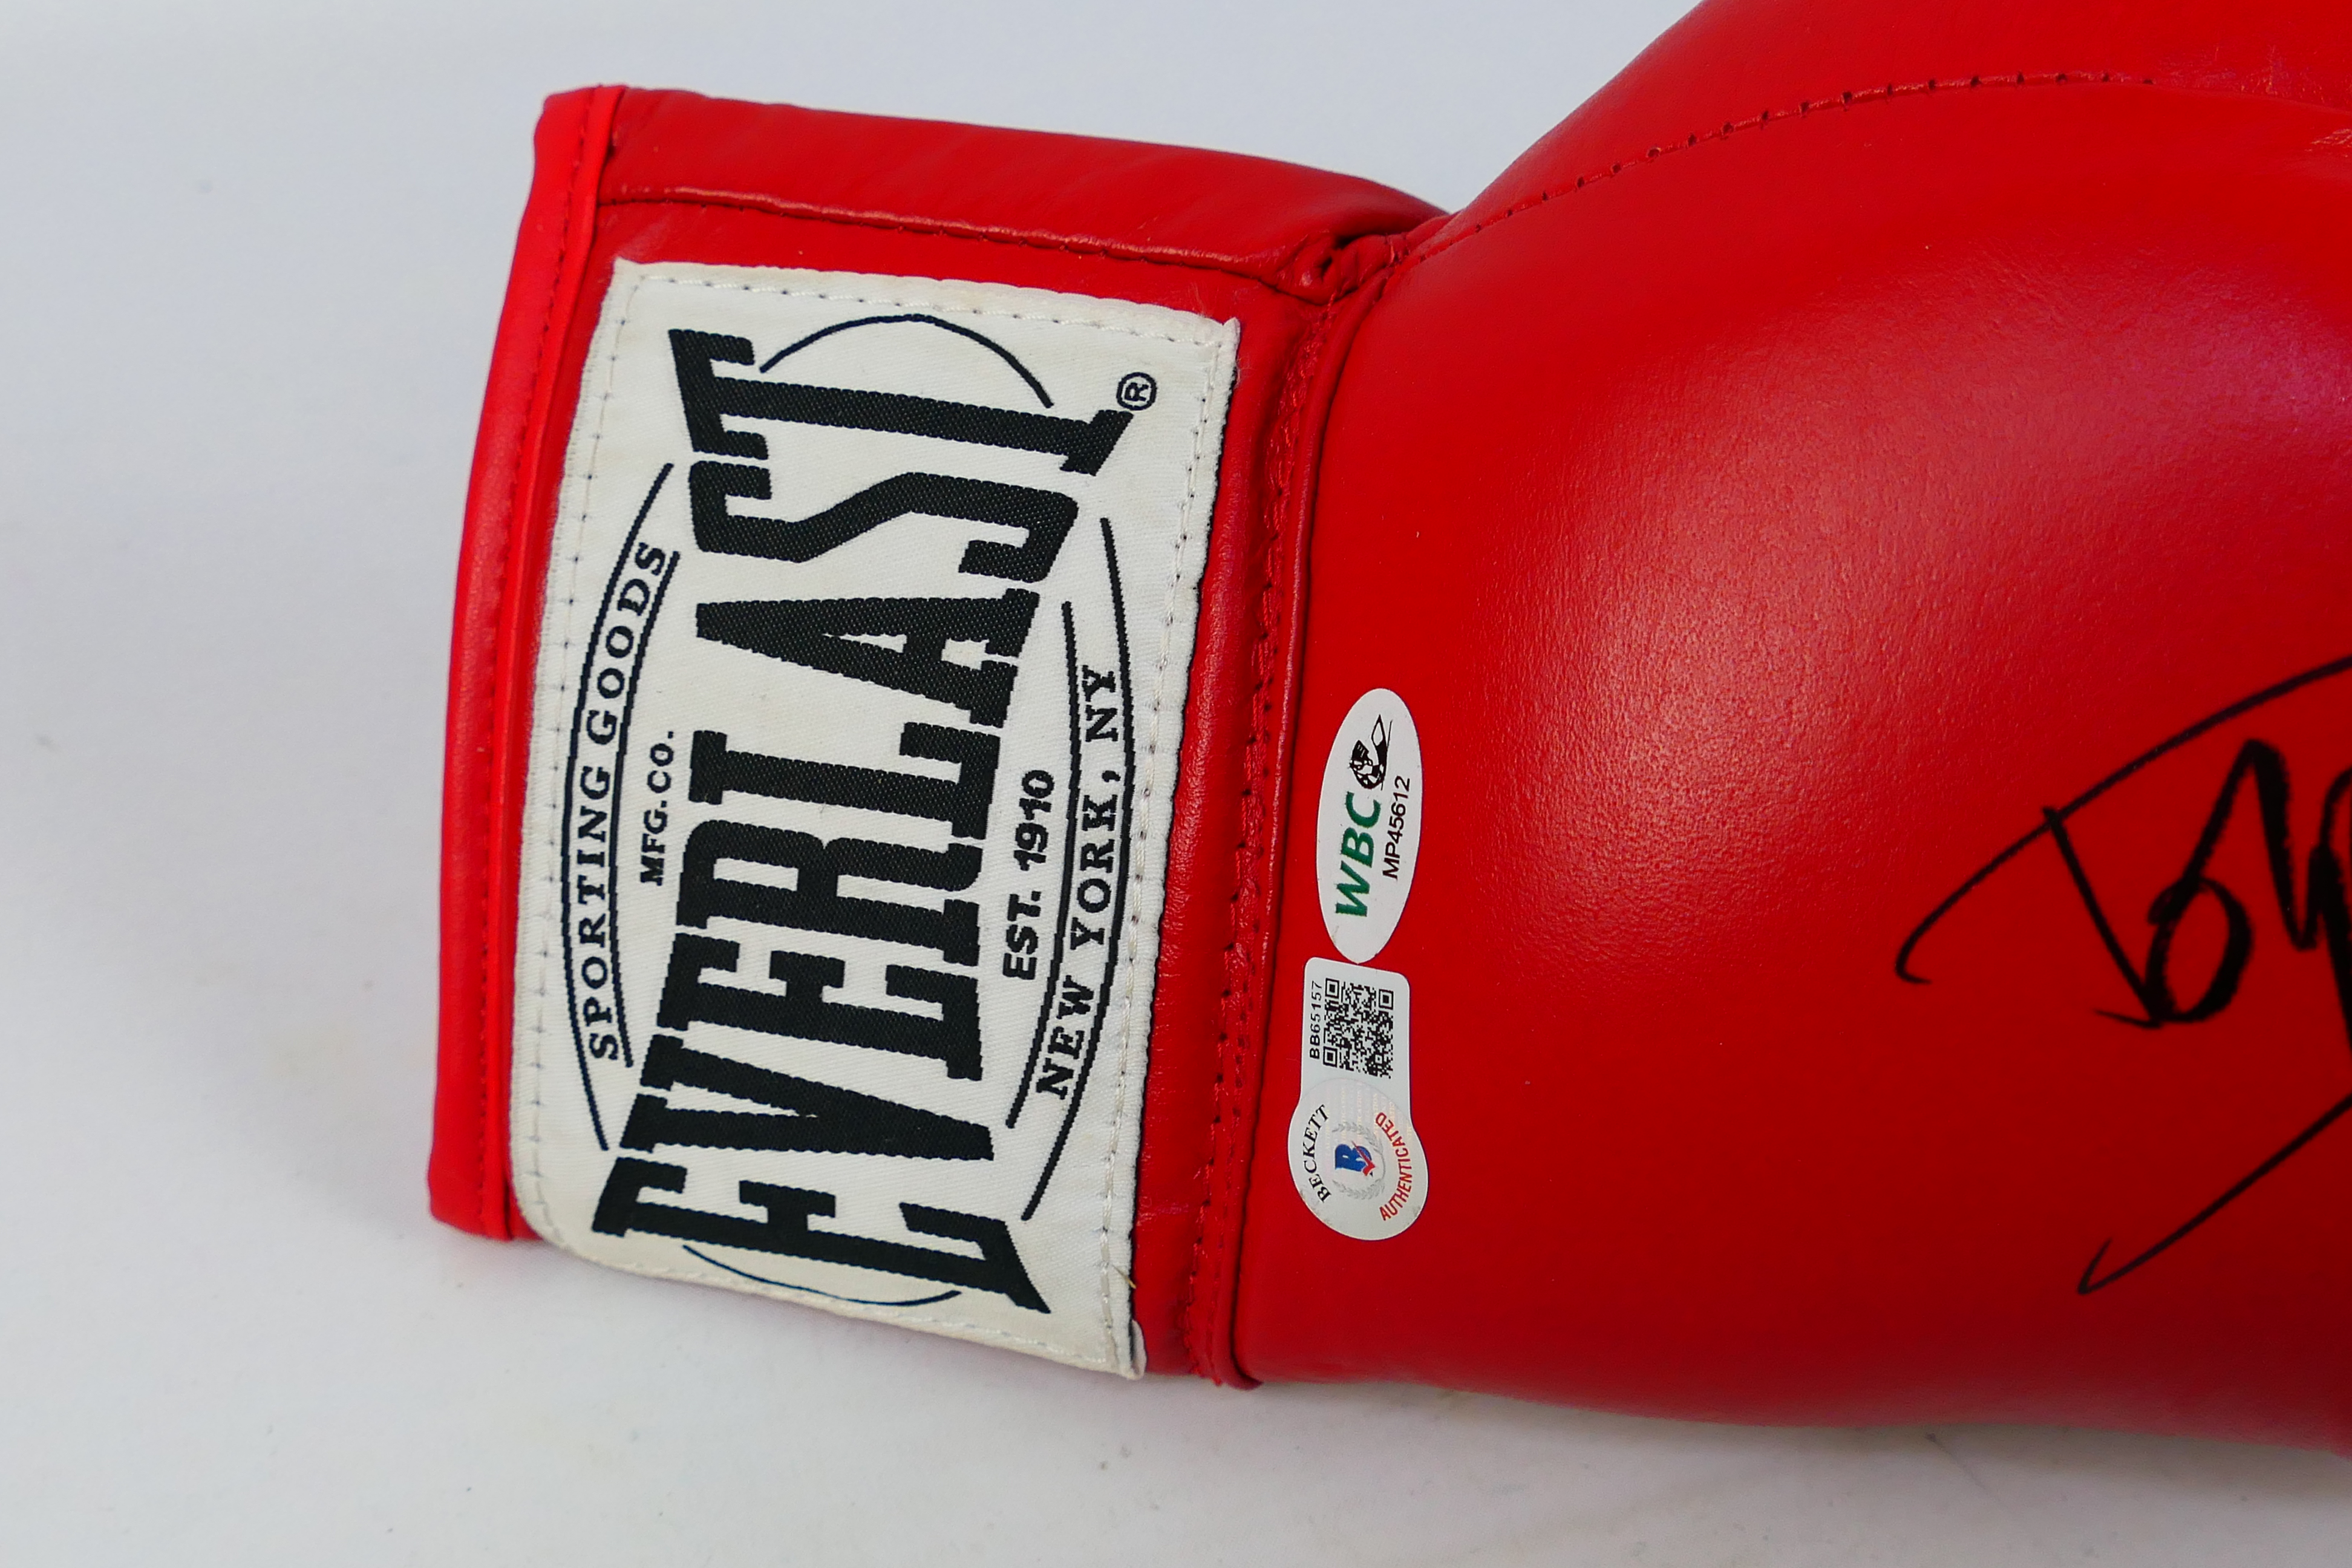 Rocky - A 10oz Everlast boxing glove signed by Dolph Lundgren, inscribed Drago below the signature, - Image 3 of 5